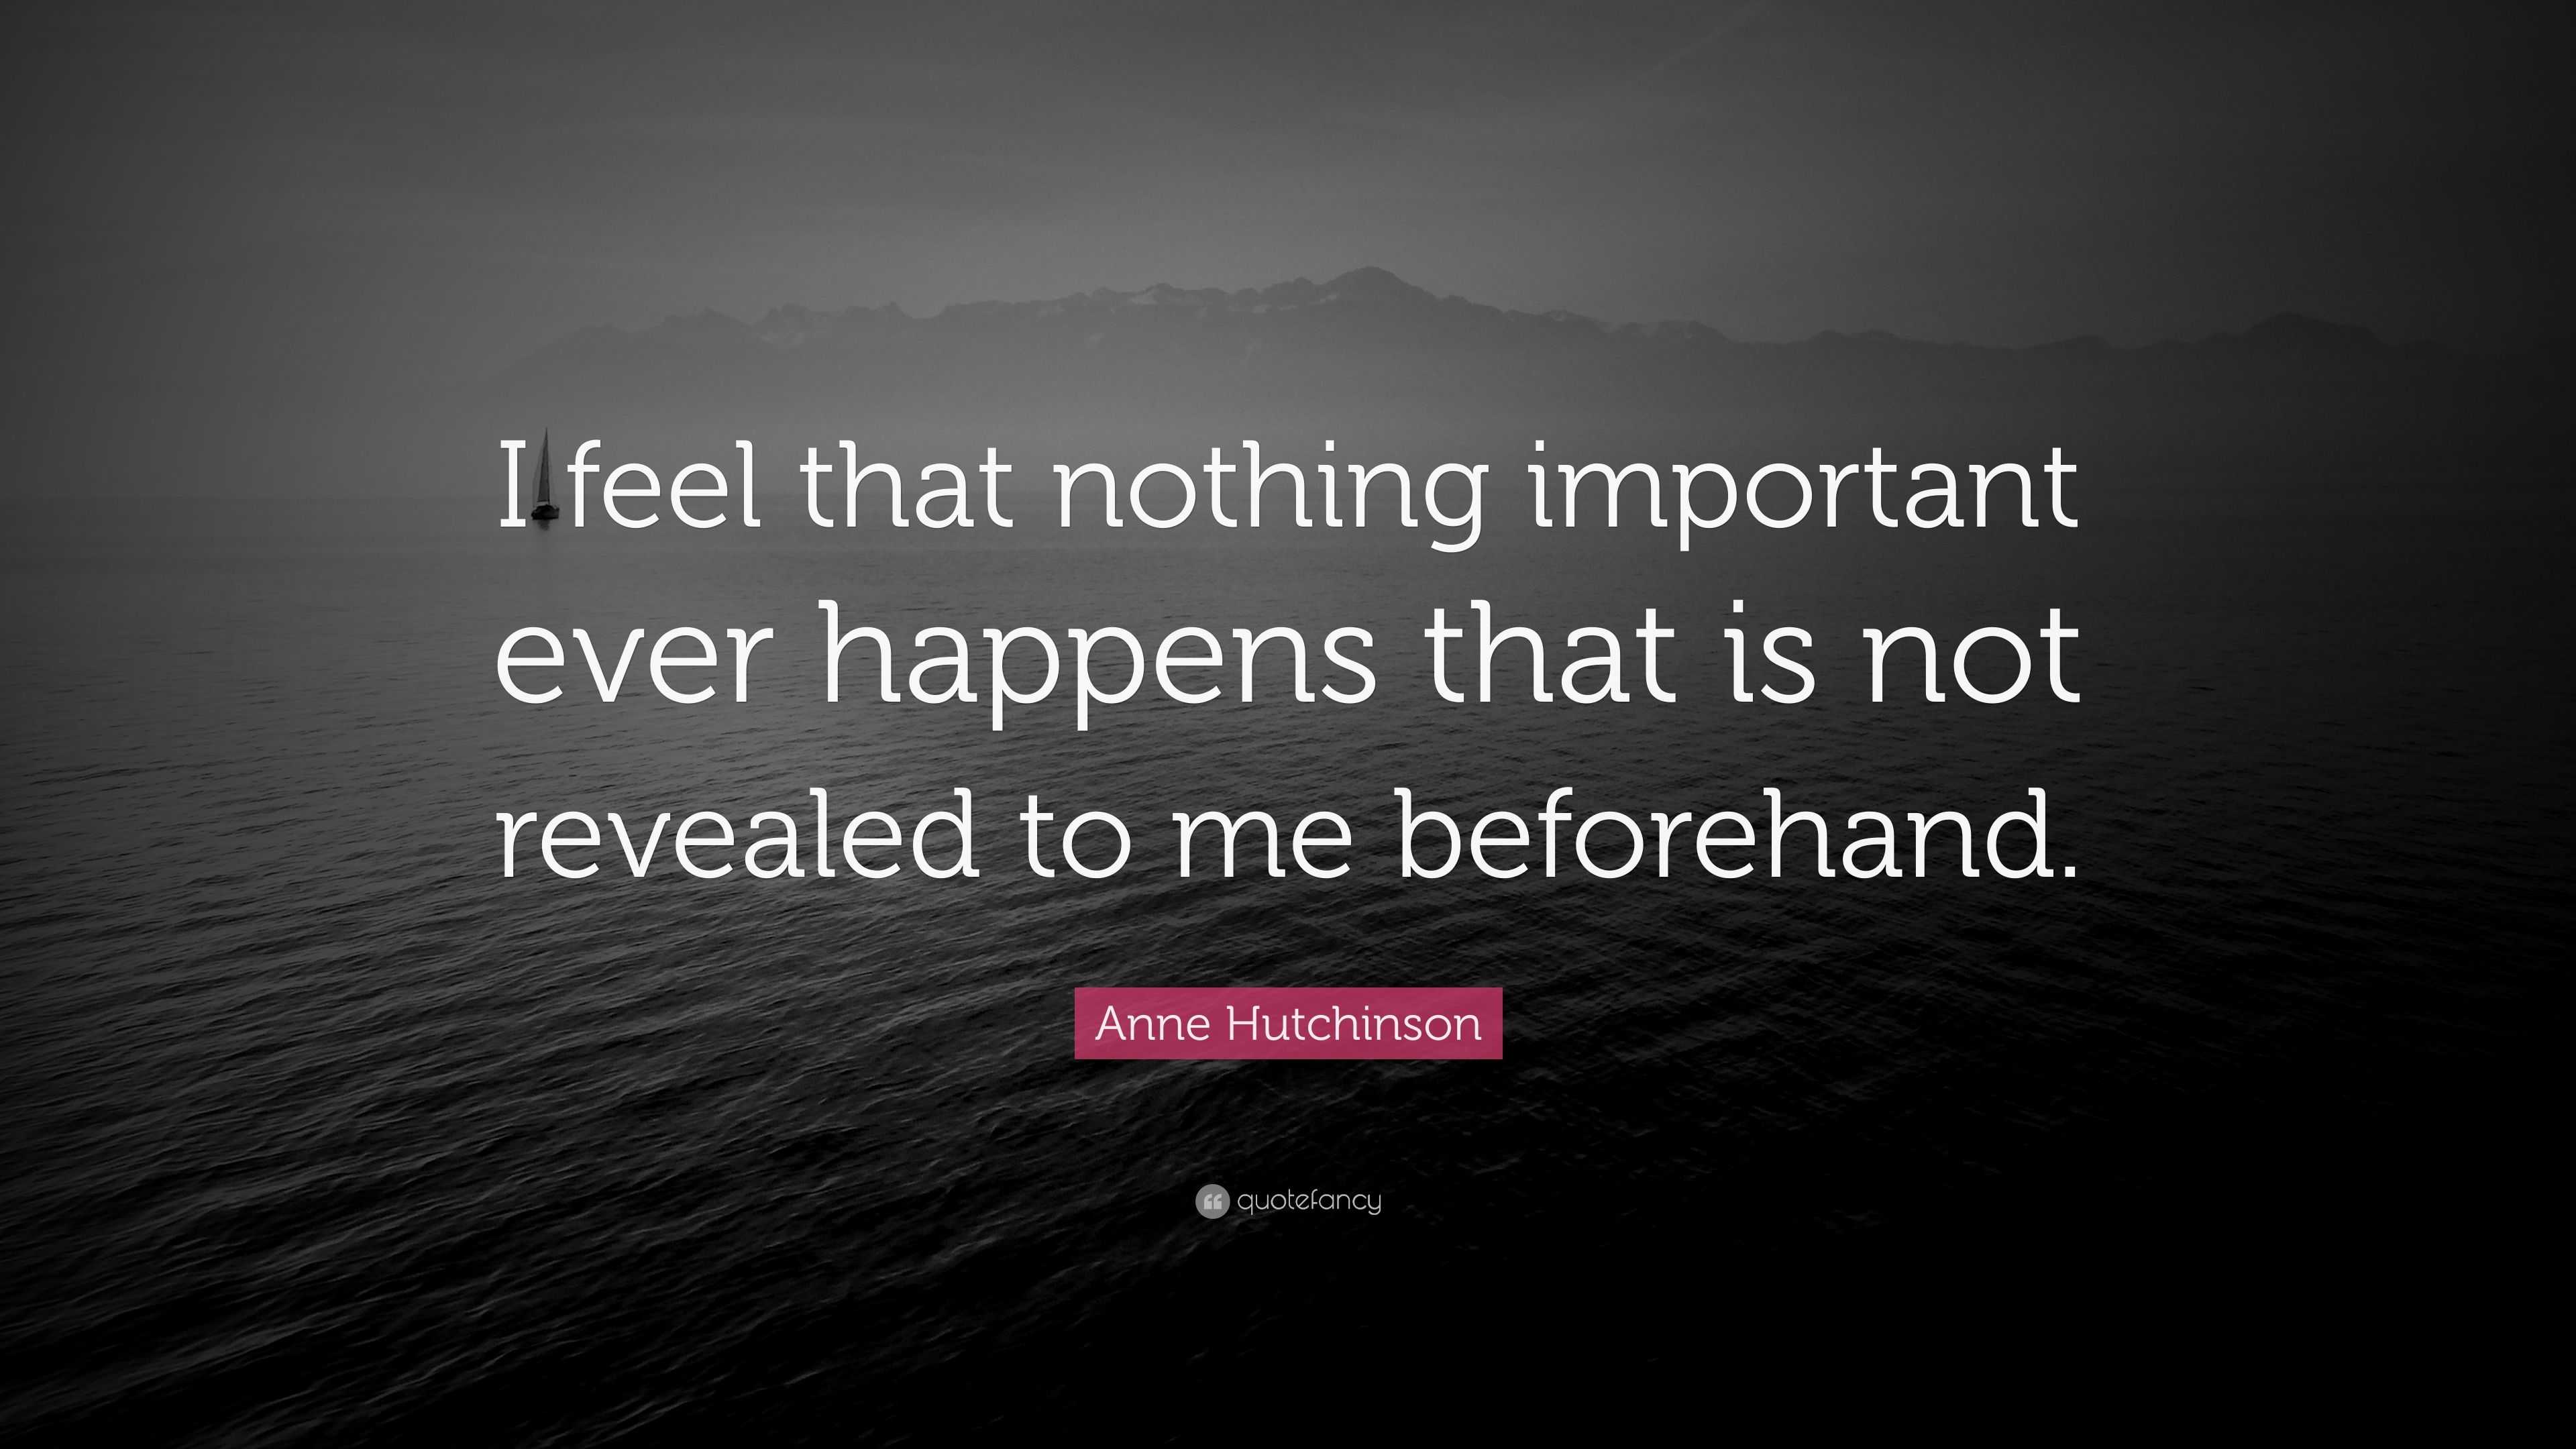 “I feel that nothing important ever happens that is not revealed to me beforehand.”